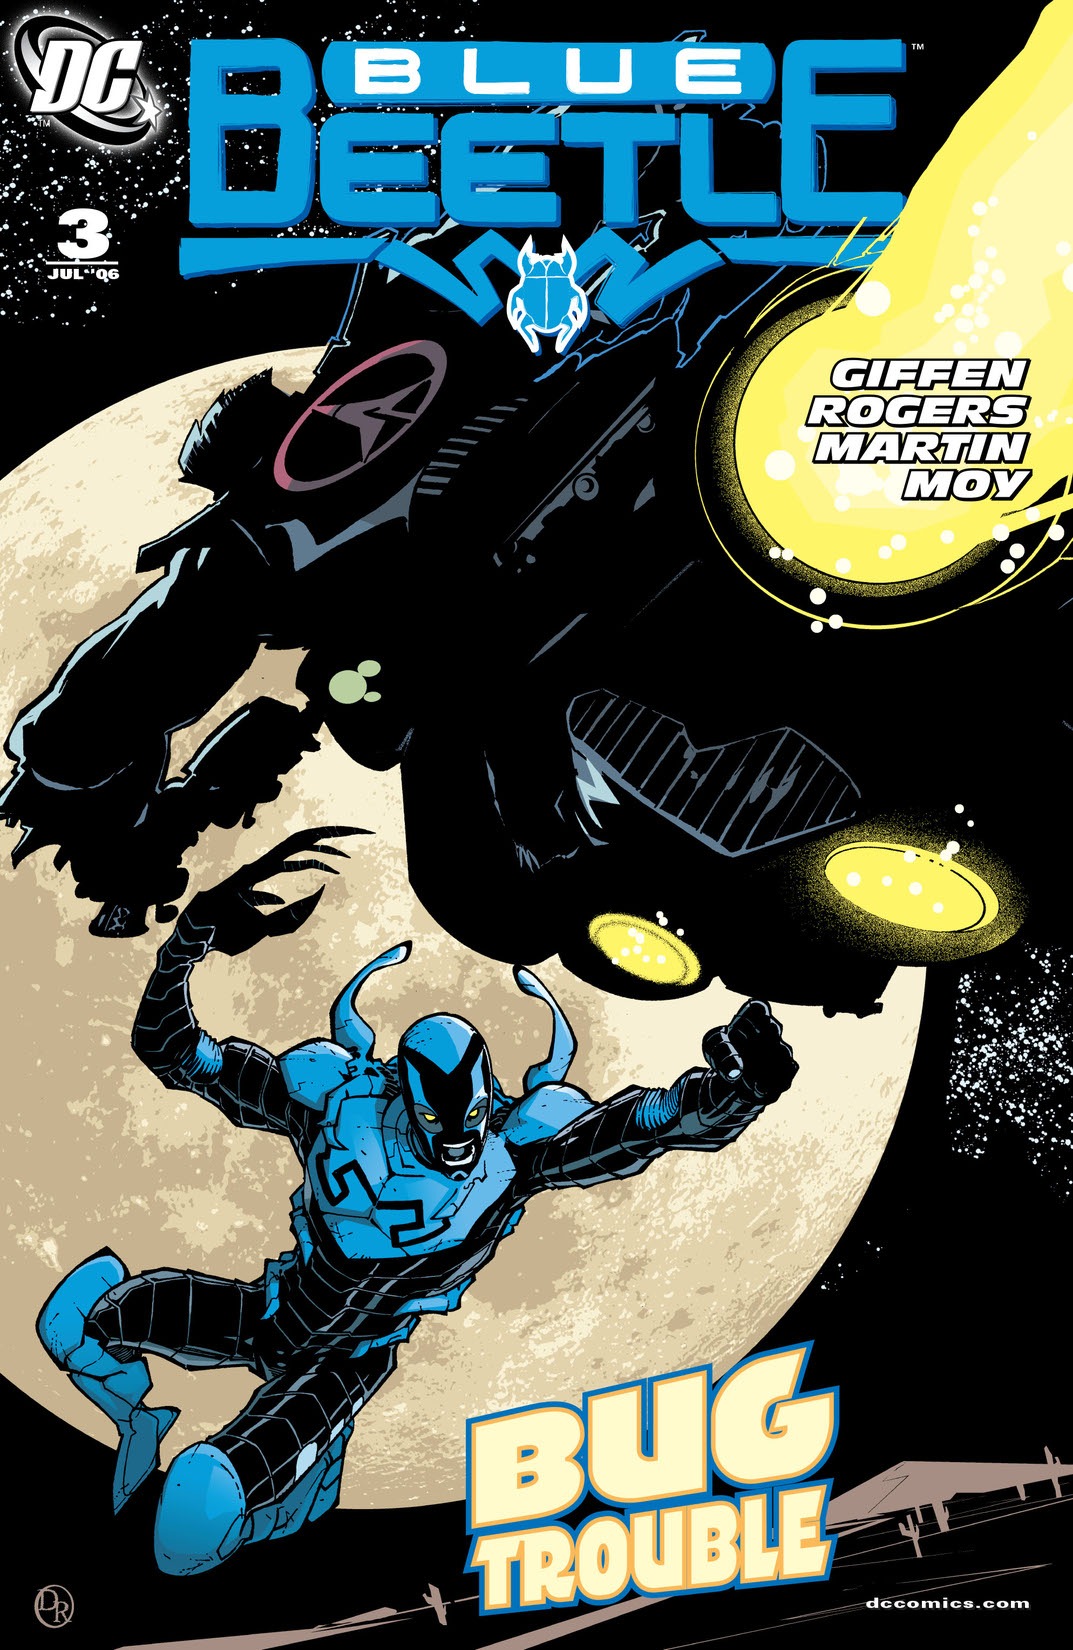 Blue Beetle (2006-) #3 preview images